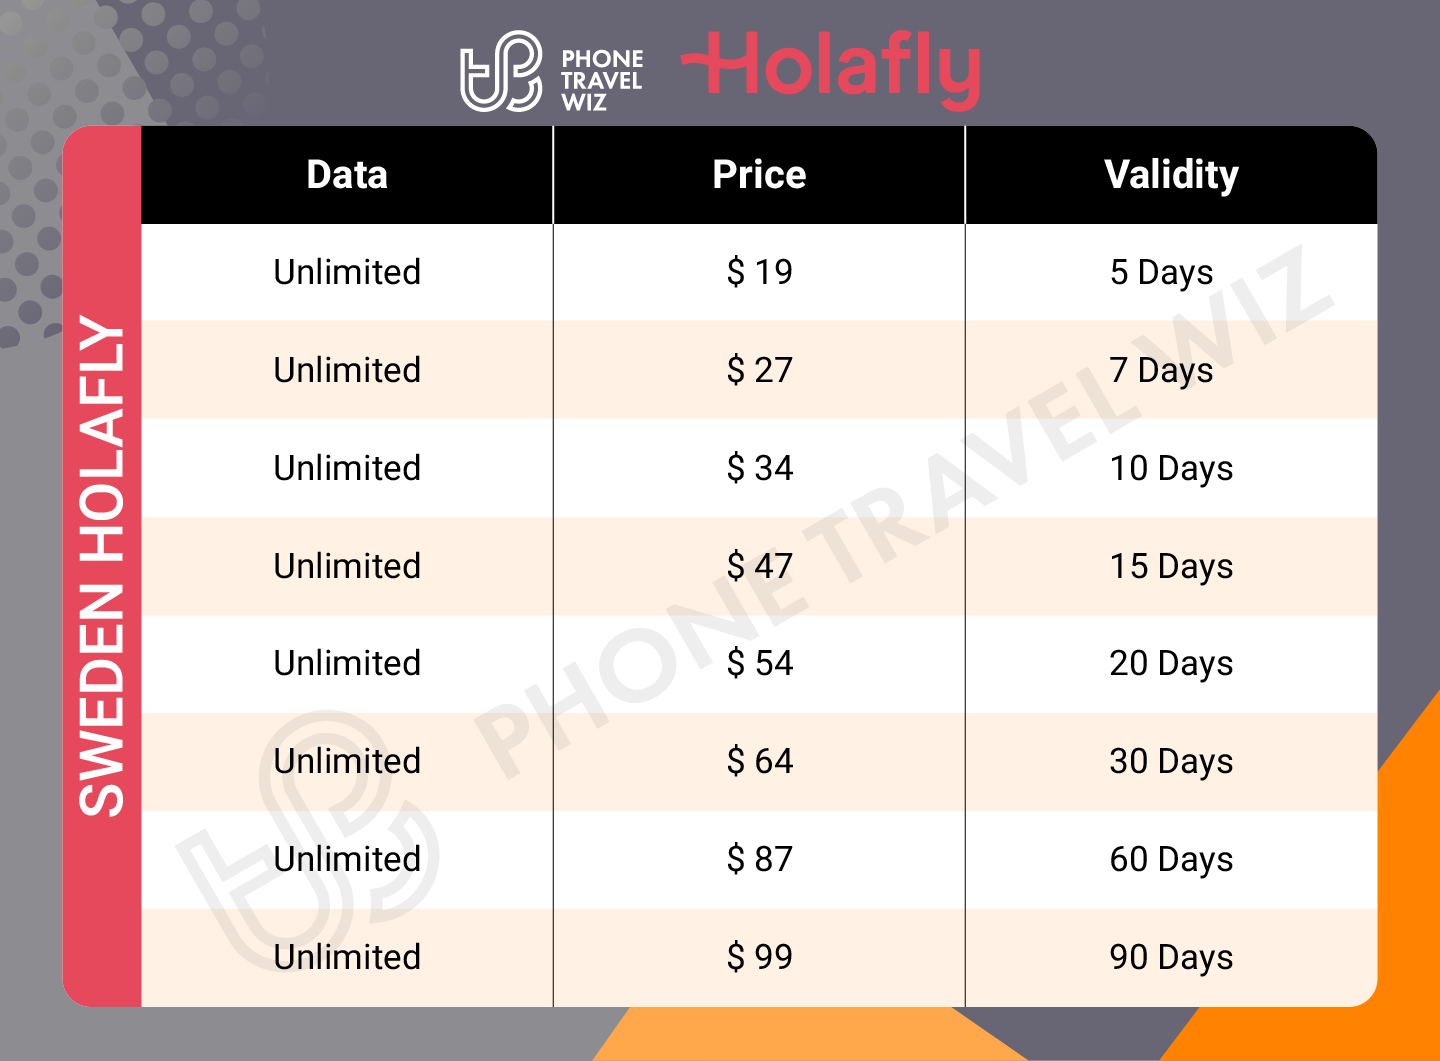 Holafly Sweden eSIM Price & Data Details Infographic by Phone Travel Wiz